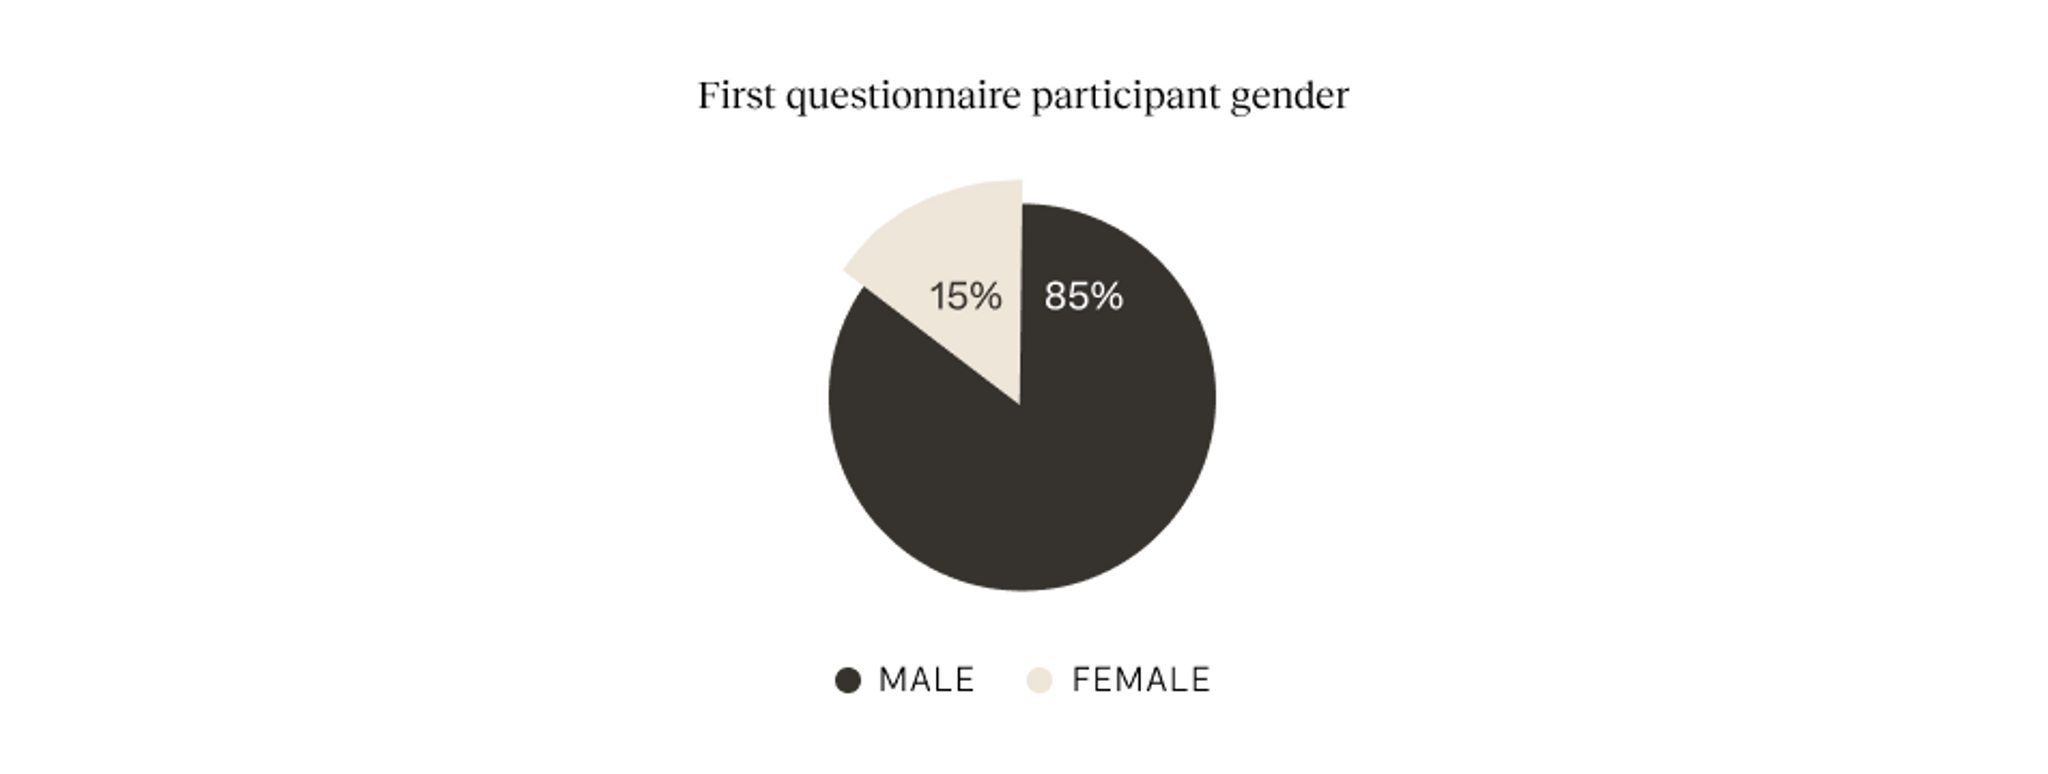 pie chart showing first questionnaire participant gender - male: 85%, female: 15%